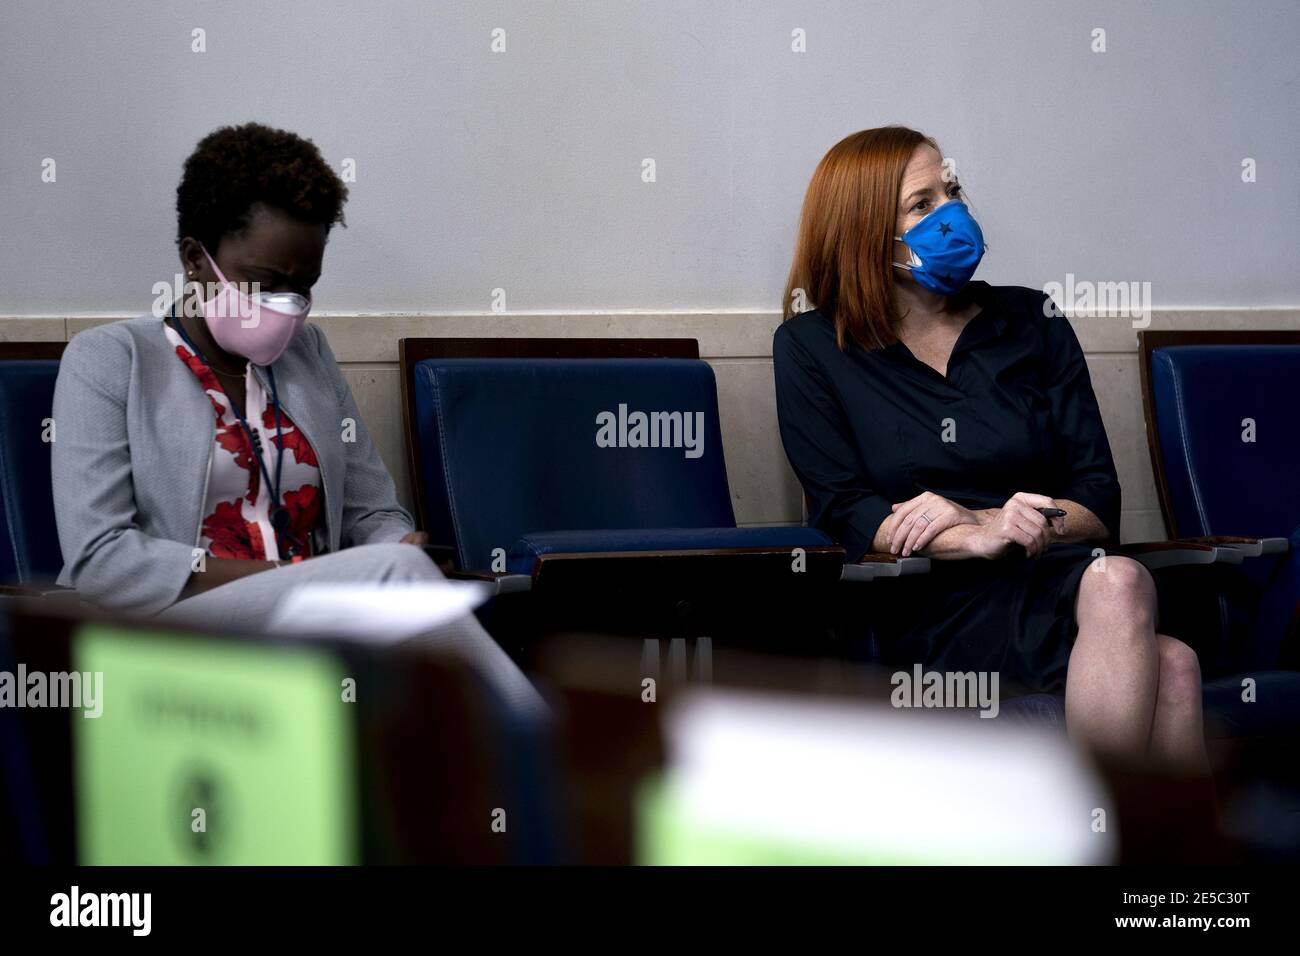 Karine Jean-Pierre, White House deputy press secretary, left, and Jen Psaki, White House press secretary, wear protective masks while listening during a news conference in the James S. Brady Press Briefing Room at the White House in Washington, DC on Wednesday, January 27, 2021. U.S. President Joe Biden will take executive action on Wednesday to combat climate change, including temporarily blocking new leases for oil drilling on federal lands, ordering a review of fossil-fuel subsidies and other measures to overhaul the U.S. energy mix. Photo by Stefani Reynolds/UPI Stock Photo